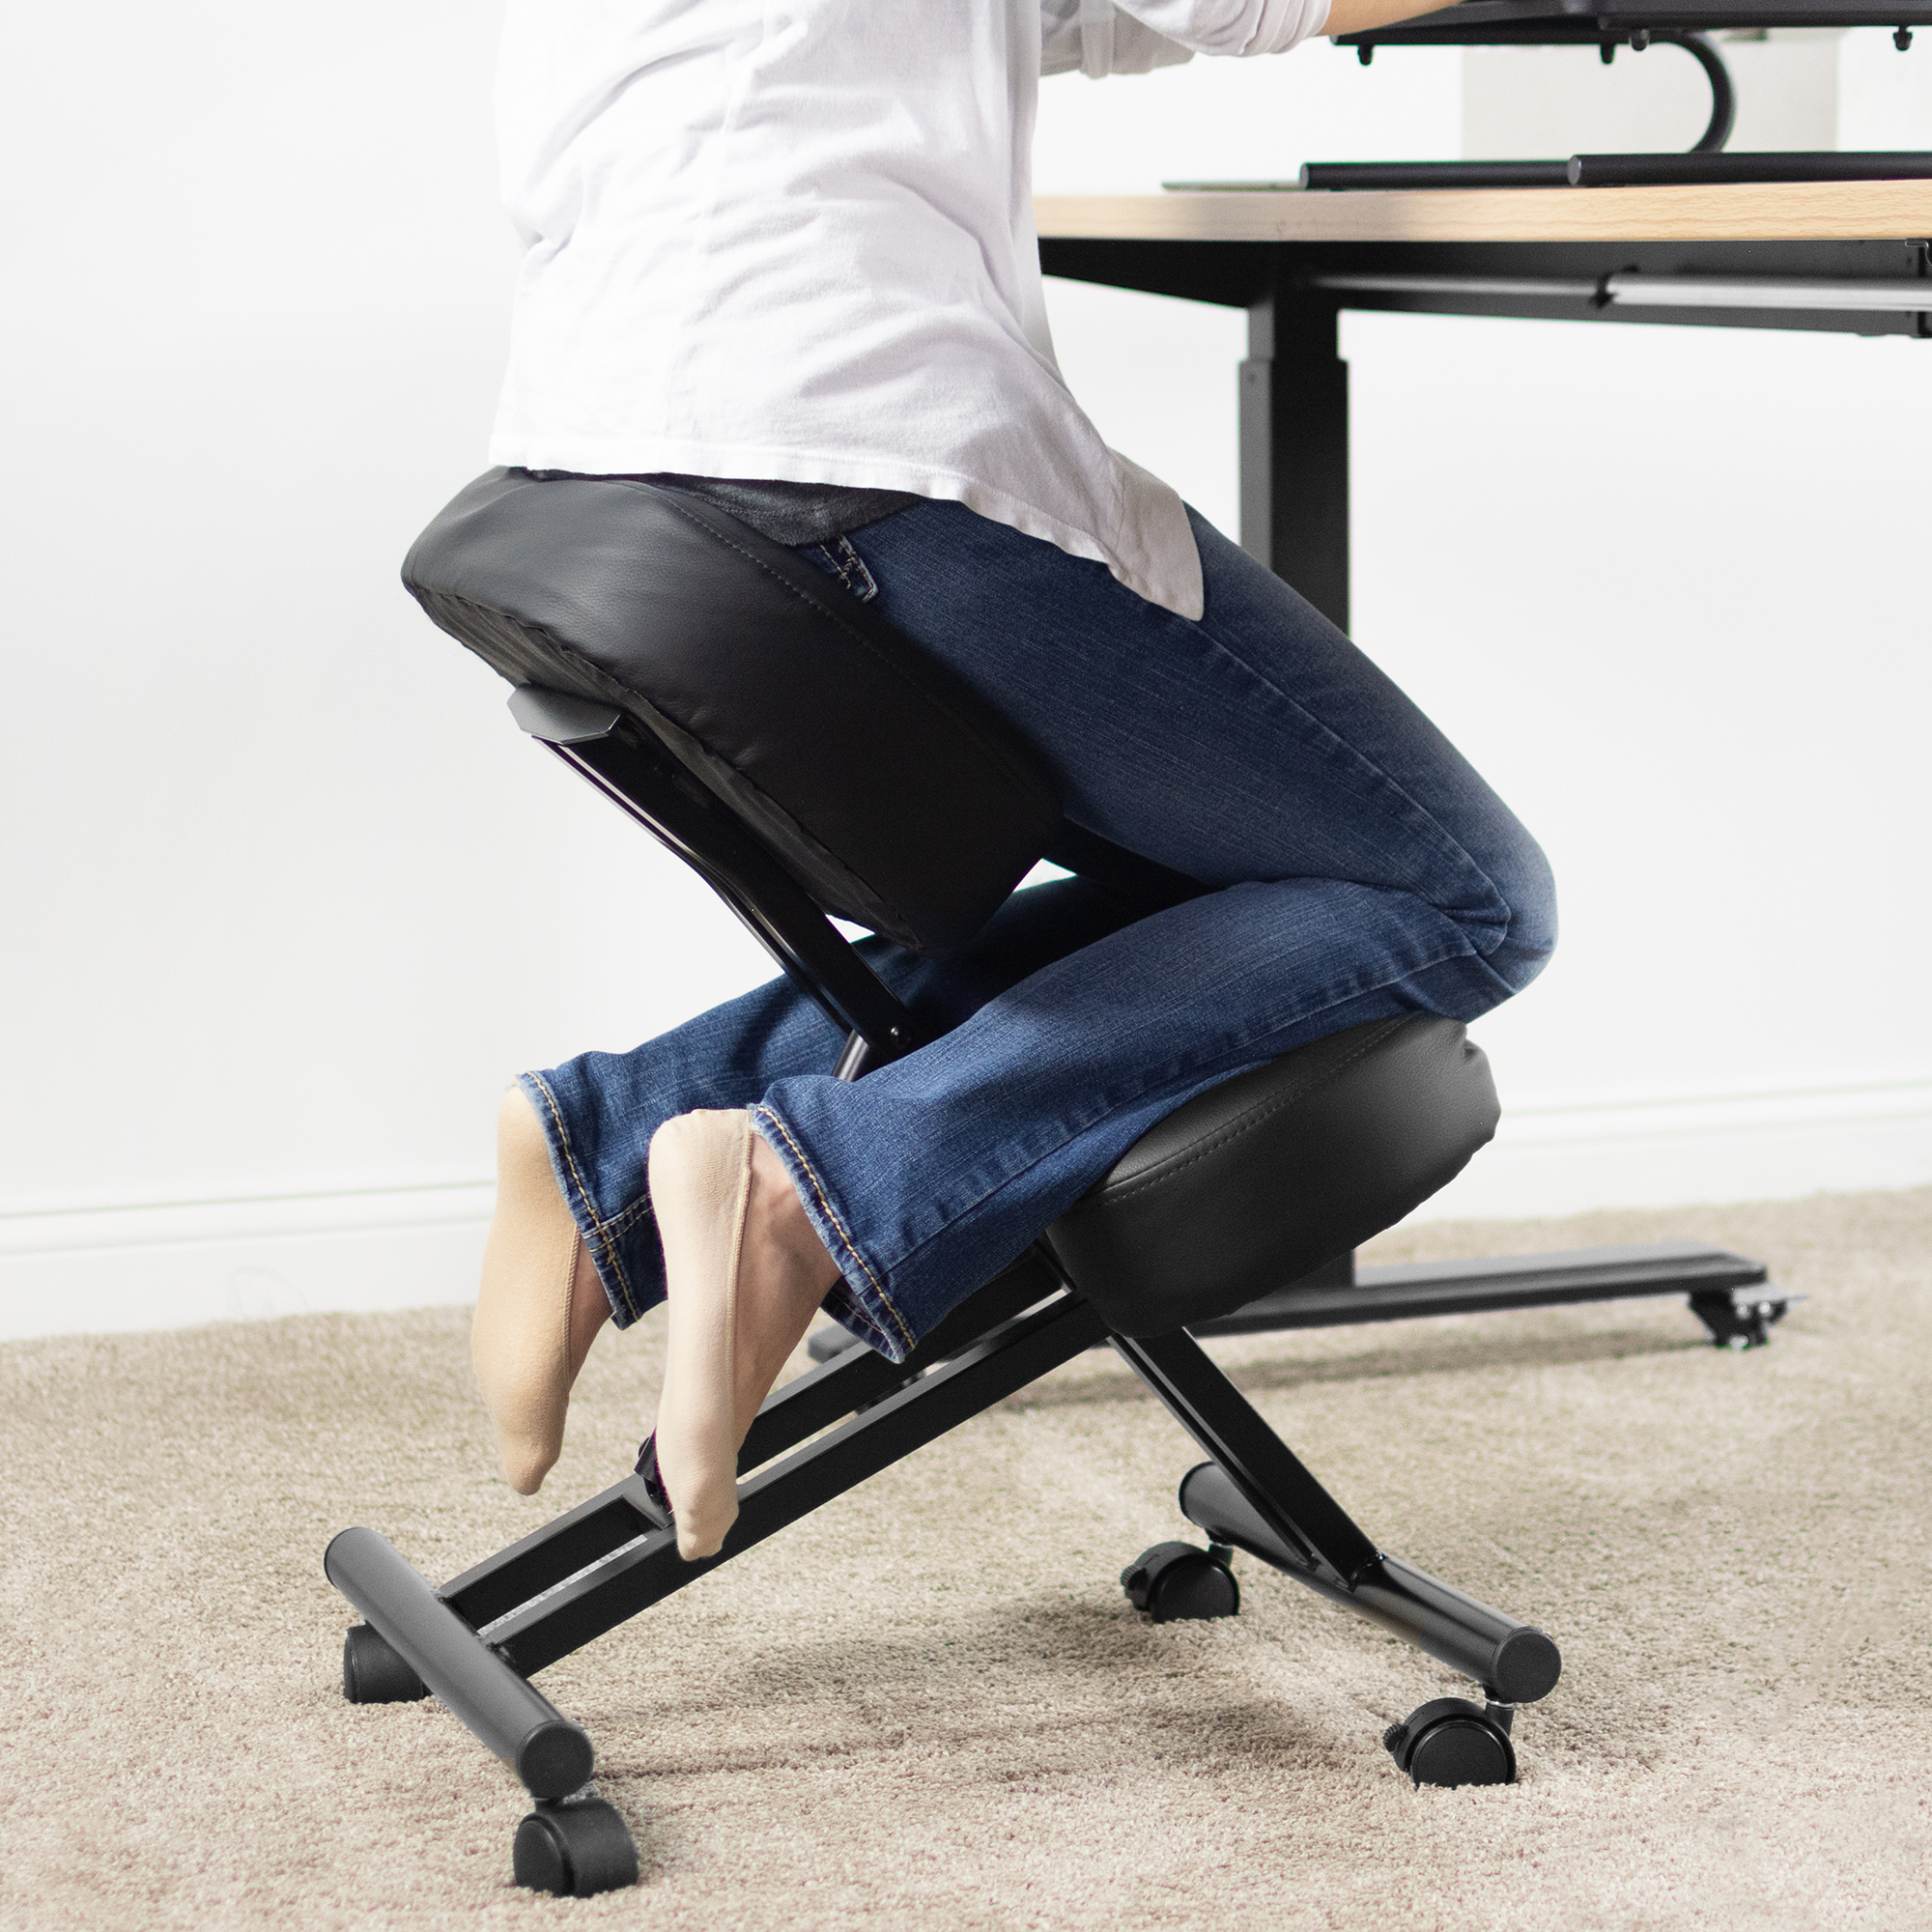 Used DRAGONN (By VIVO) Ergonomic Kneeling Chair for Home and Office ...